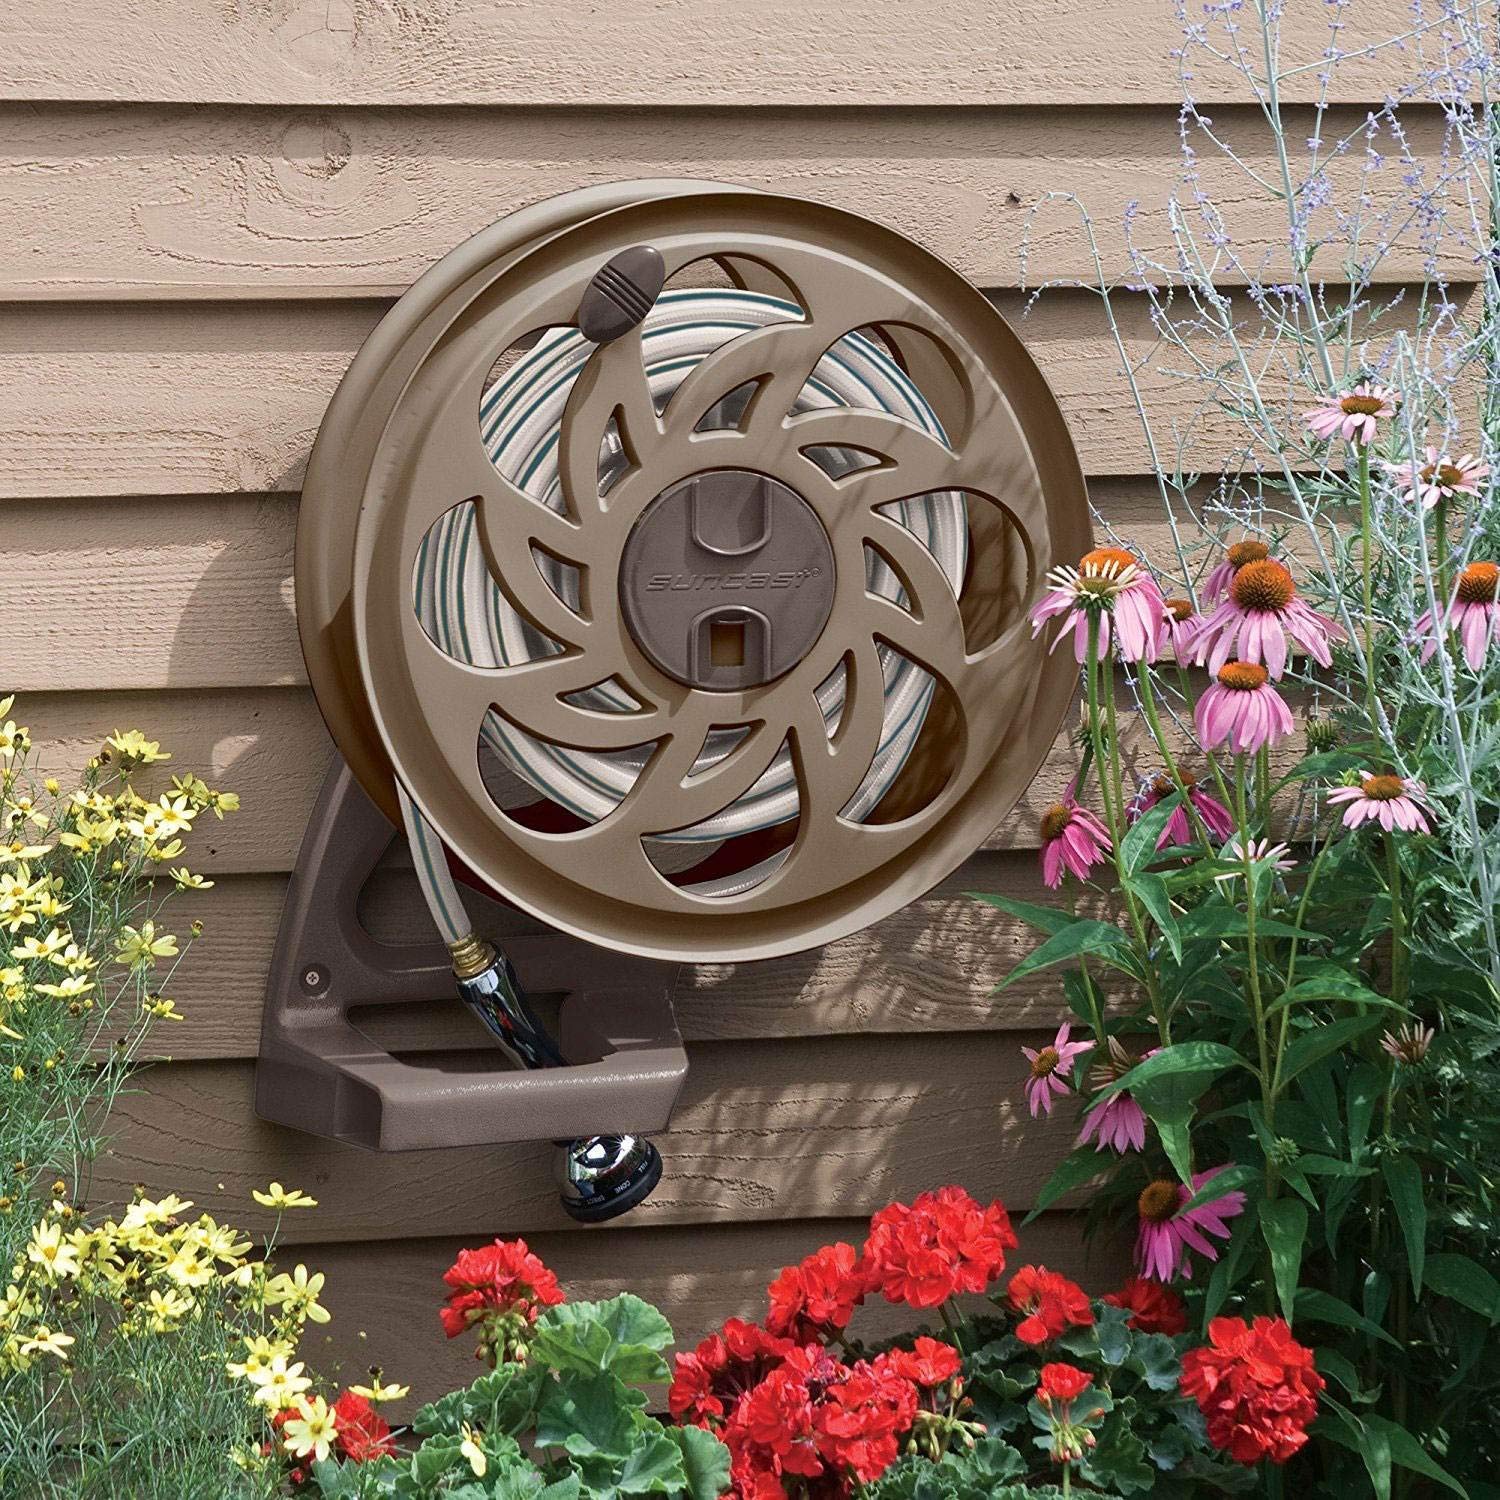 Suncast Sidetracker Garden Hose Reel with Guide - Fully Assembled Outdoor Wall Mount Tracker with Removable Reel - 125' Hose Capacity - Dark Taupe - image 4 of 4